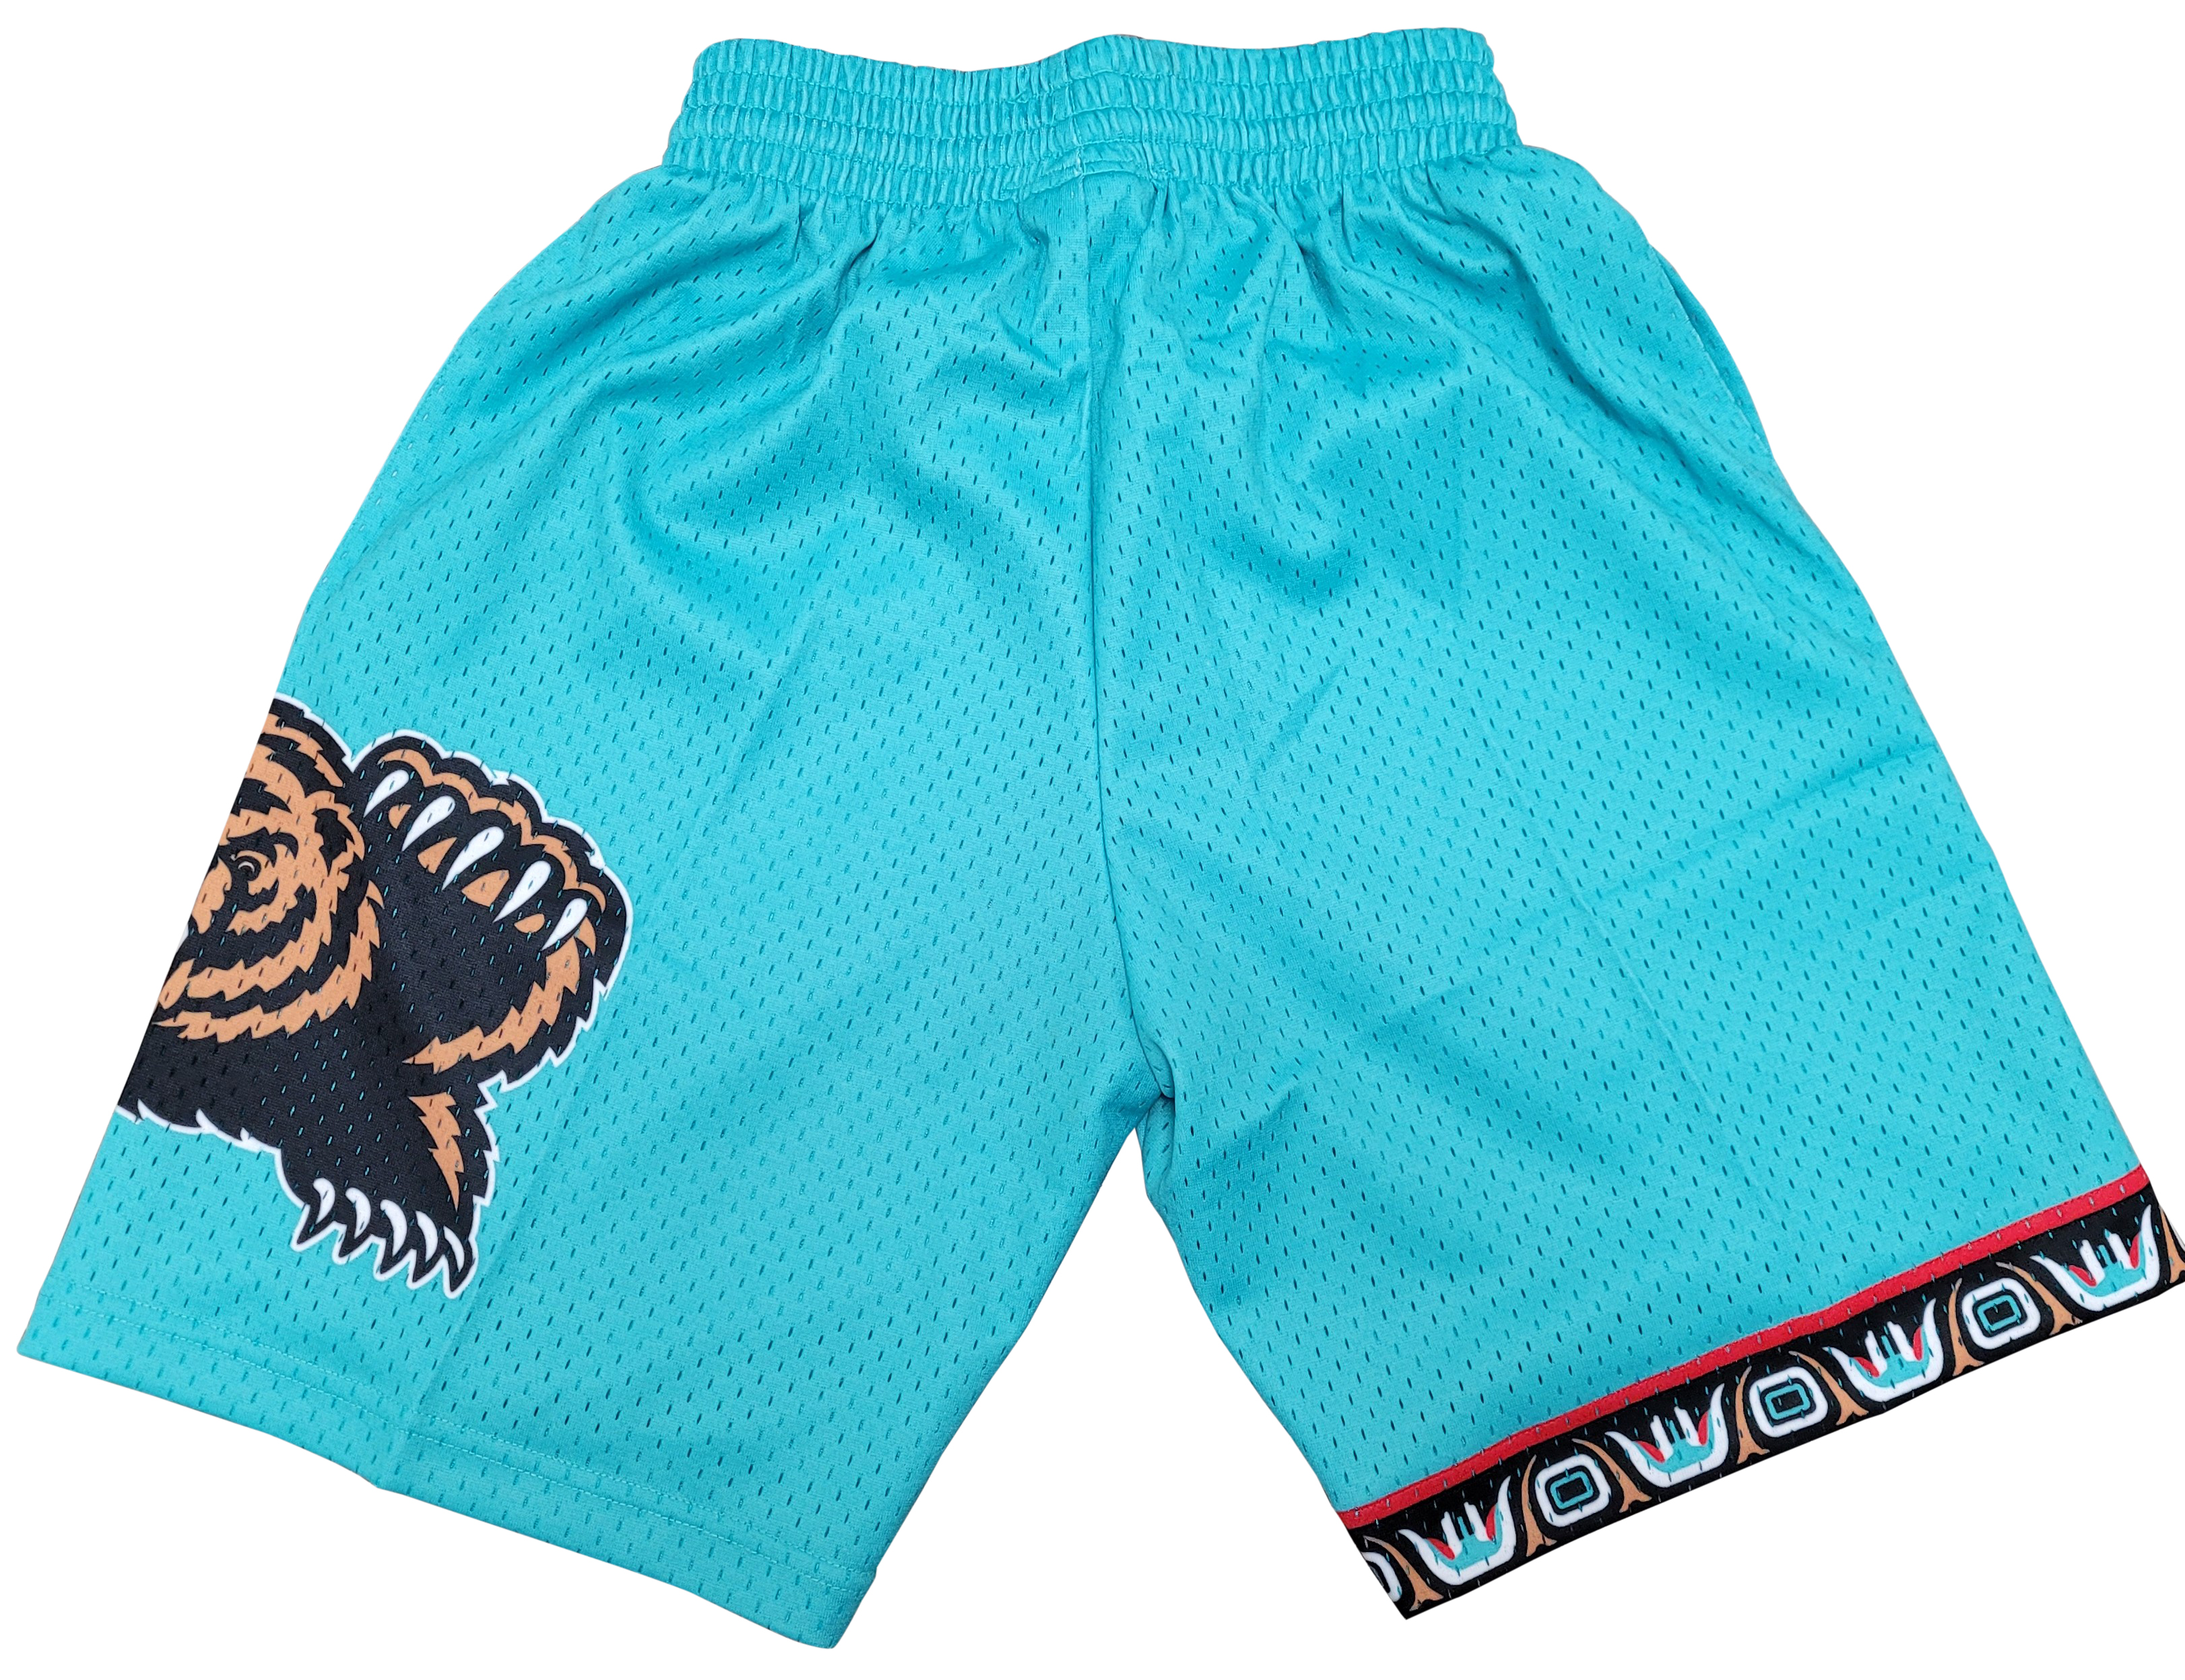 Mitchell & Ness Teal NBA Vancouver Grizzlies 96-97 Road Swingman Shorts